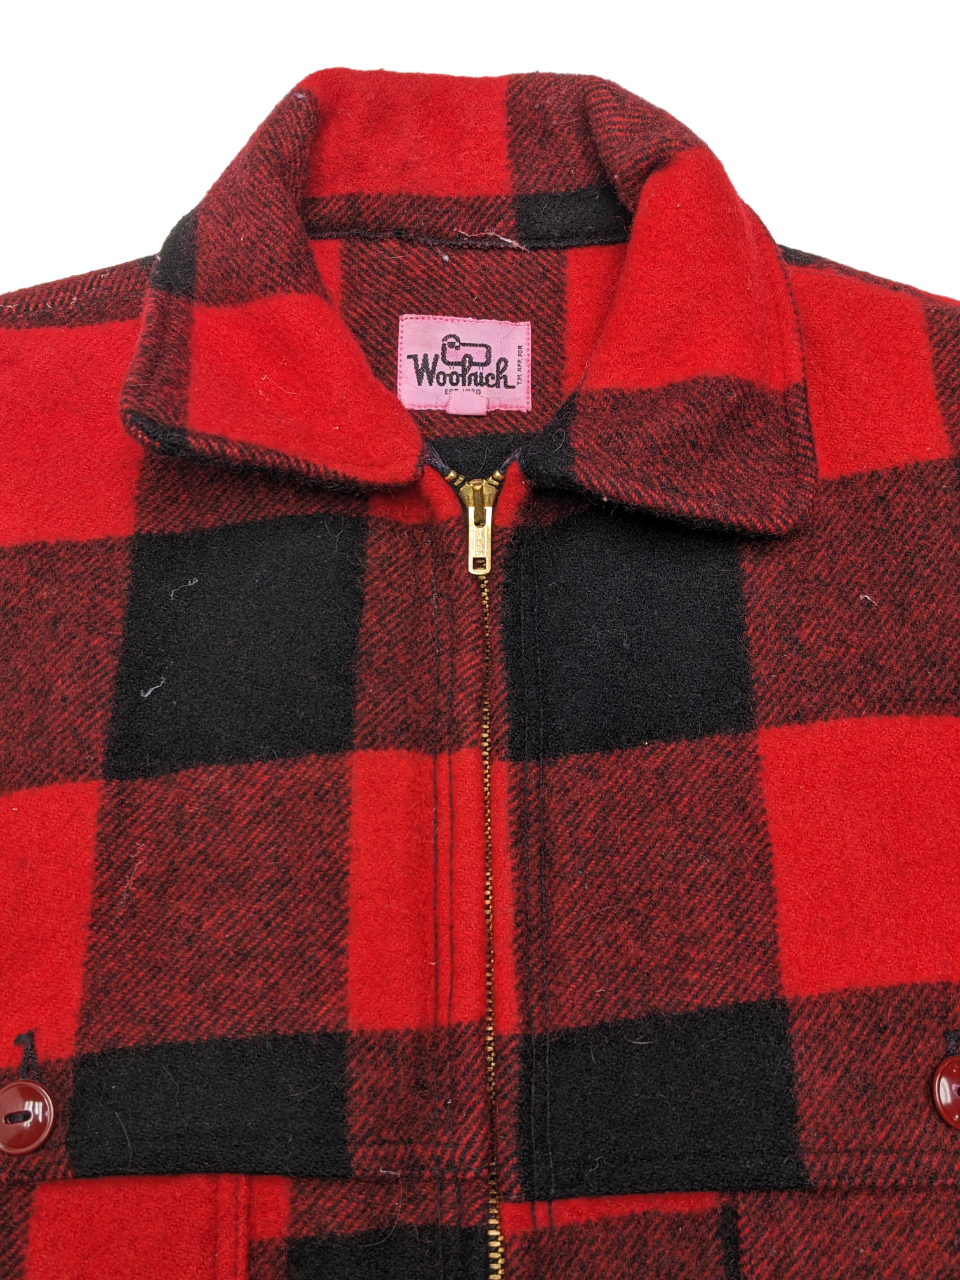 Vintage Woolrich Buffalo Check Hunting Jacket 1 pc 1 lb D0416241-05